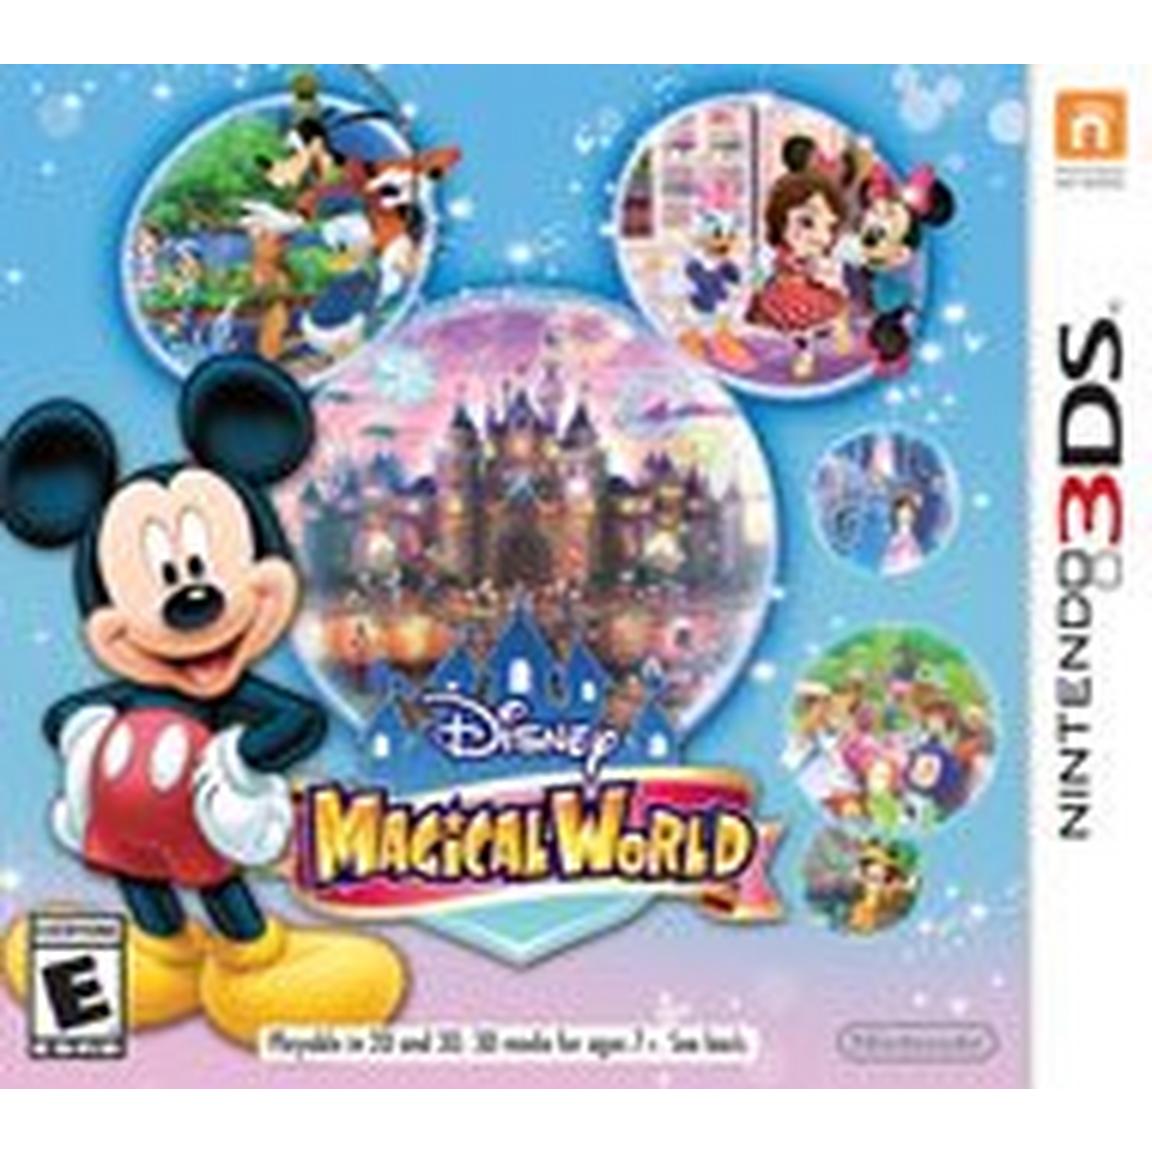 Disney Magical World - Nintendo 3DS, Pre-Owned